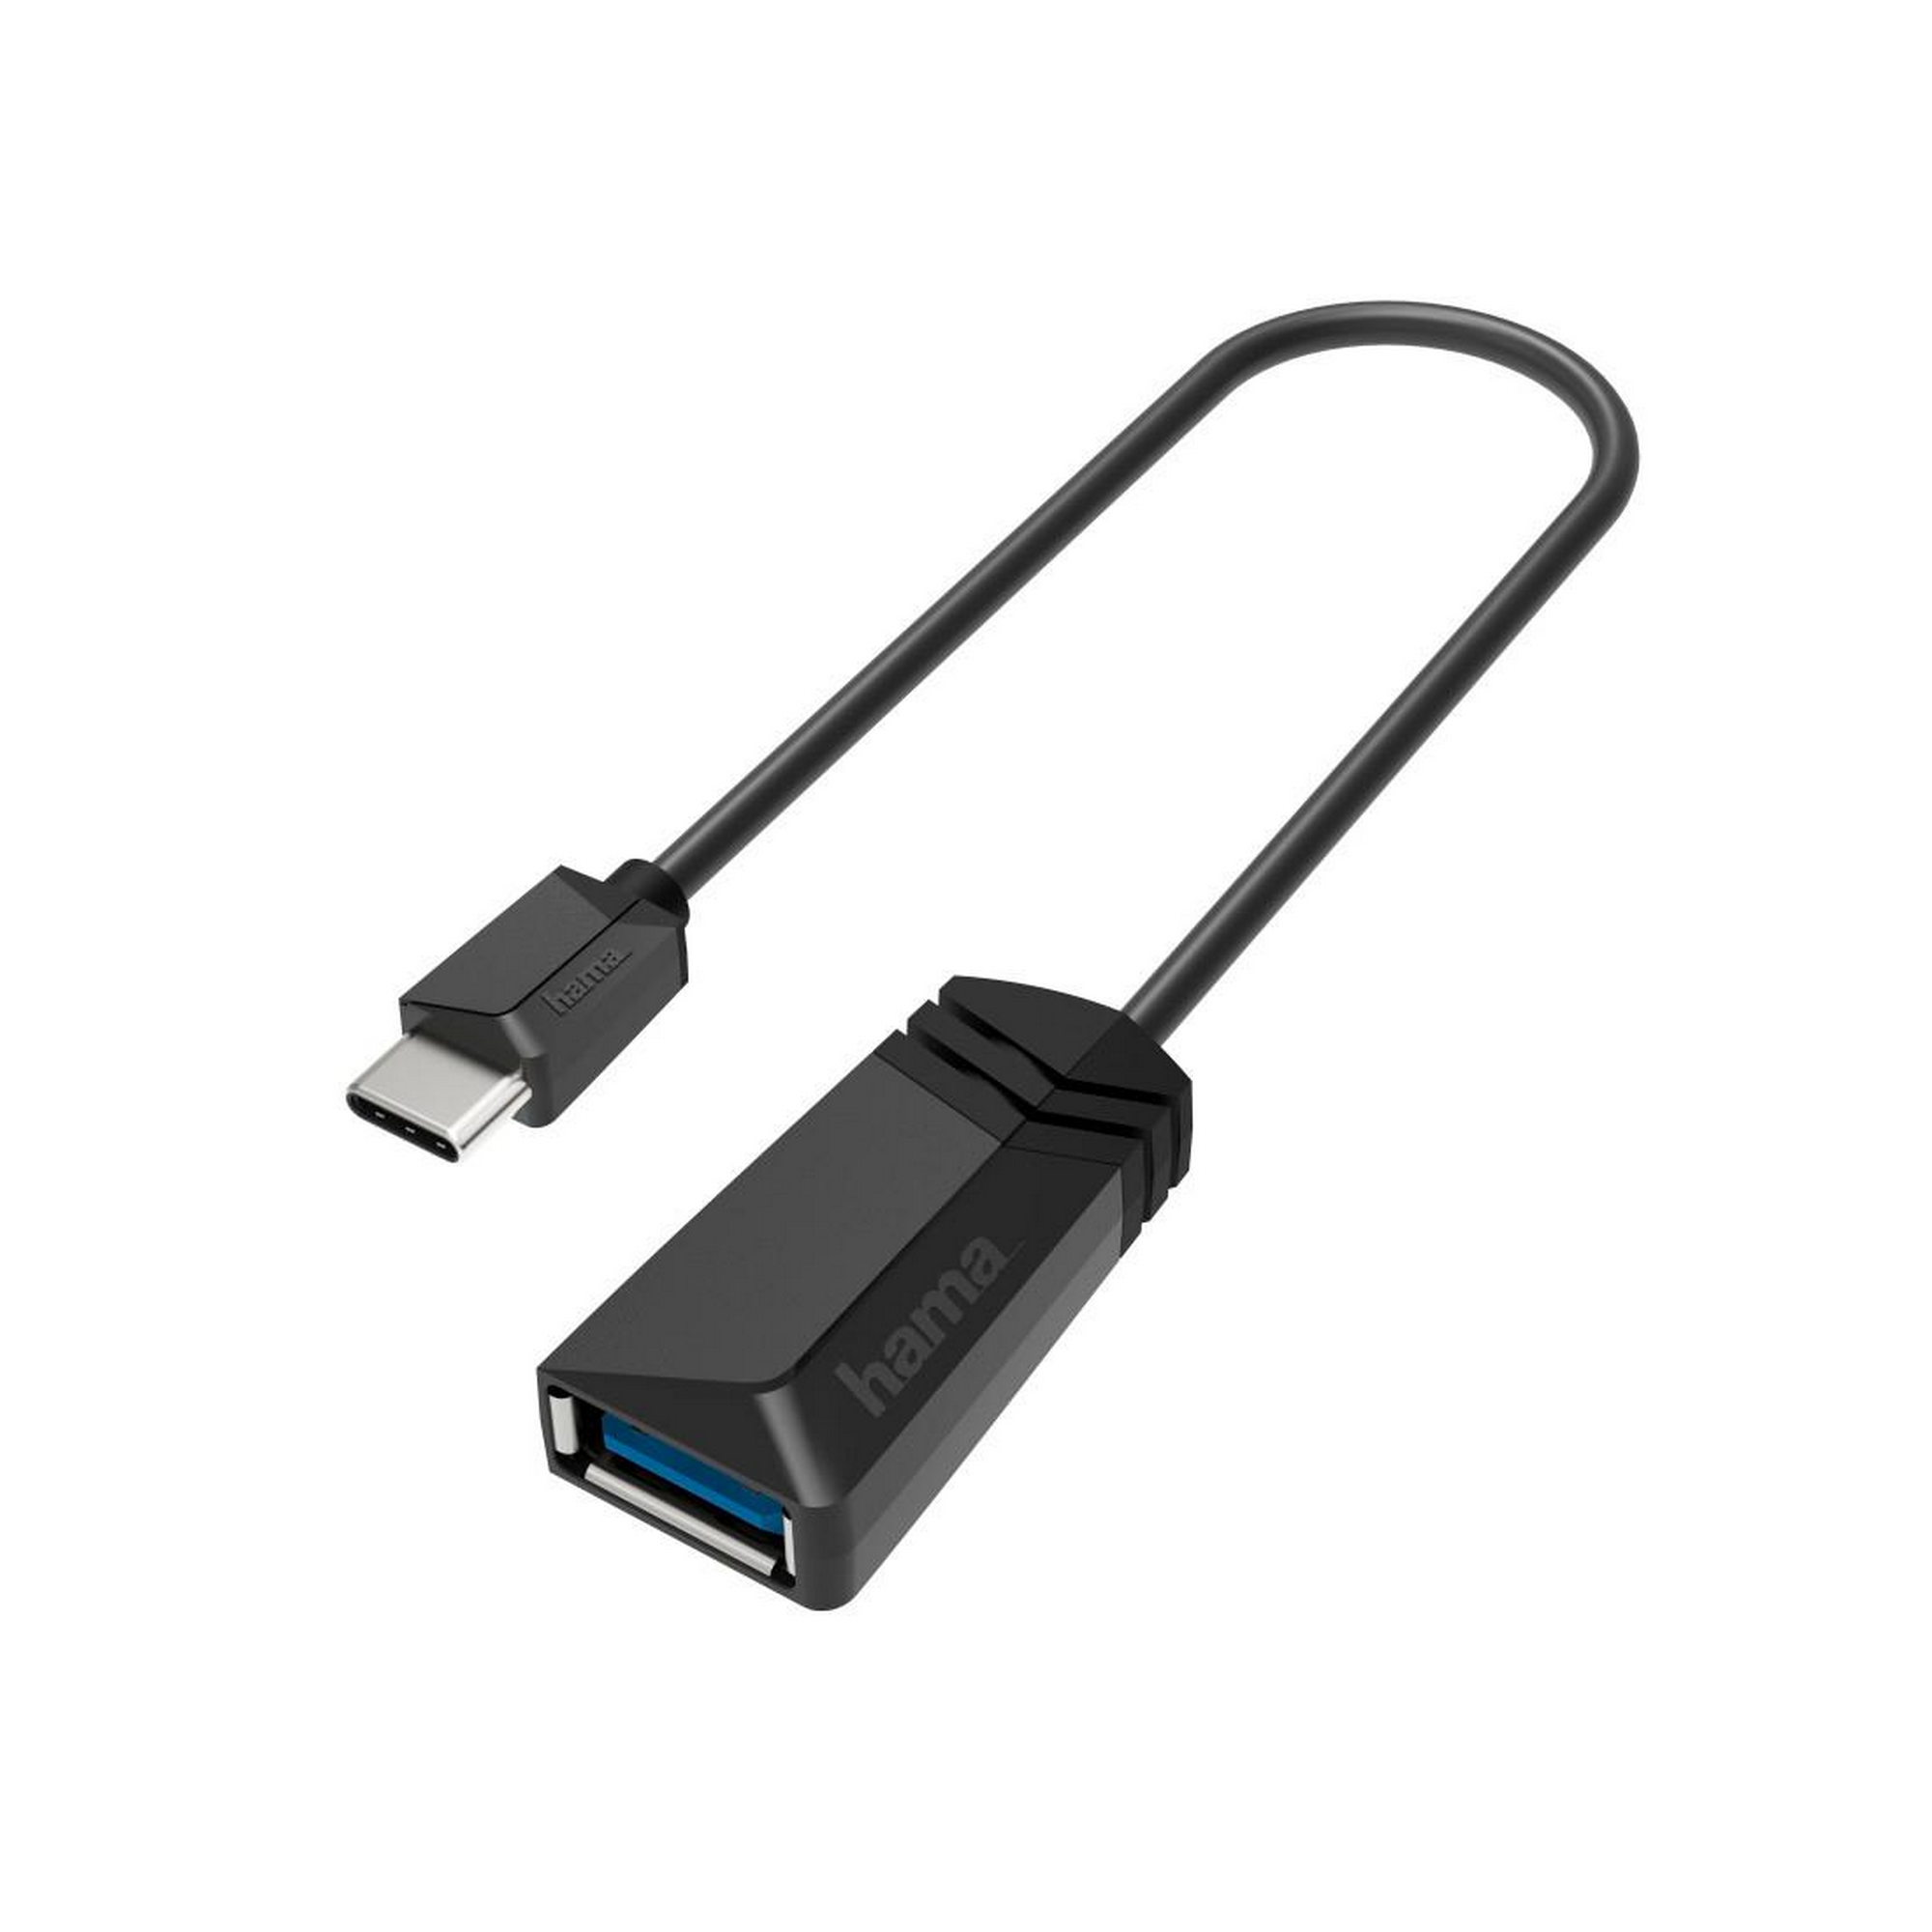 USB-OTG-Adapter USB-C-Stecker mit USB-A-Buchse + product picture